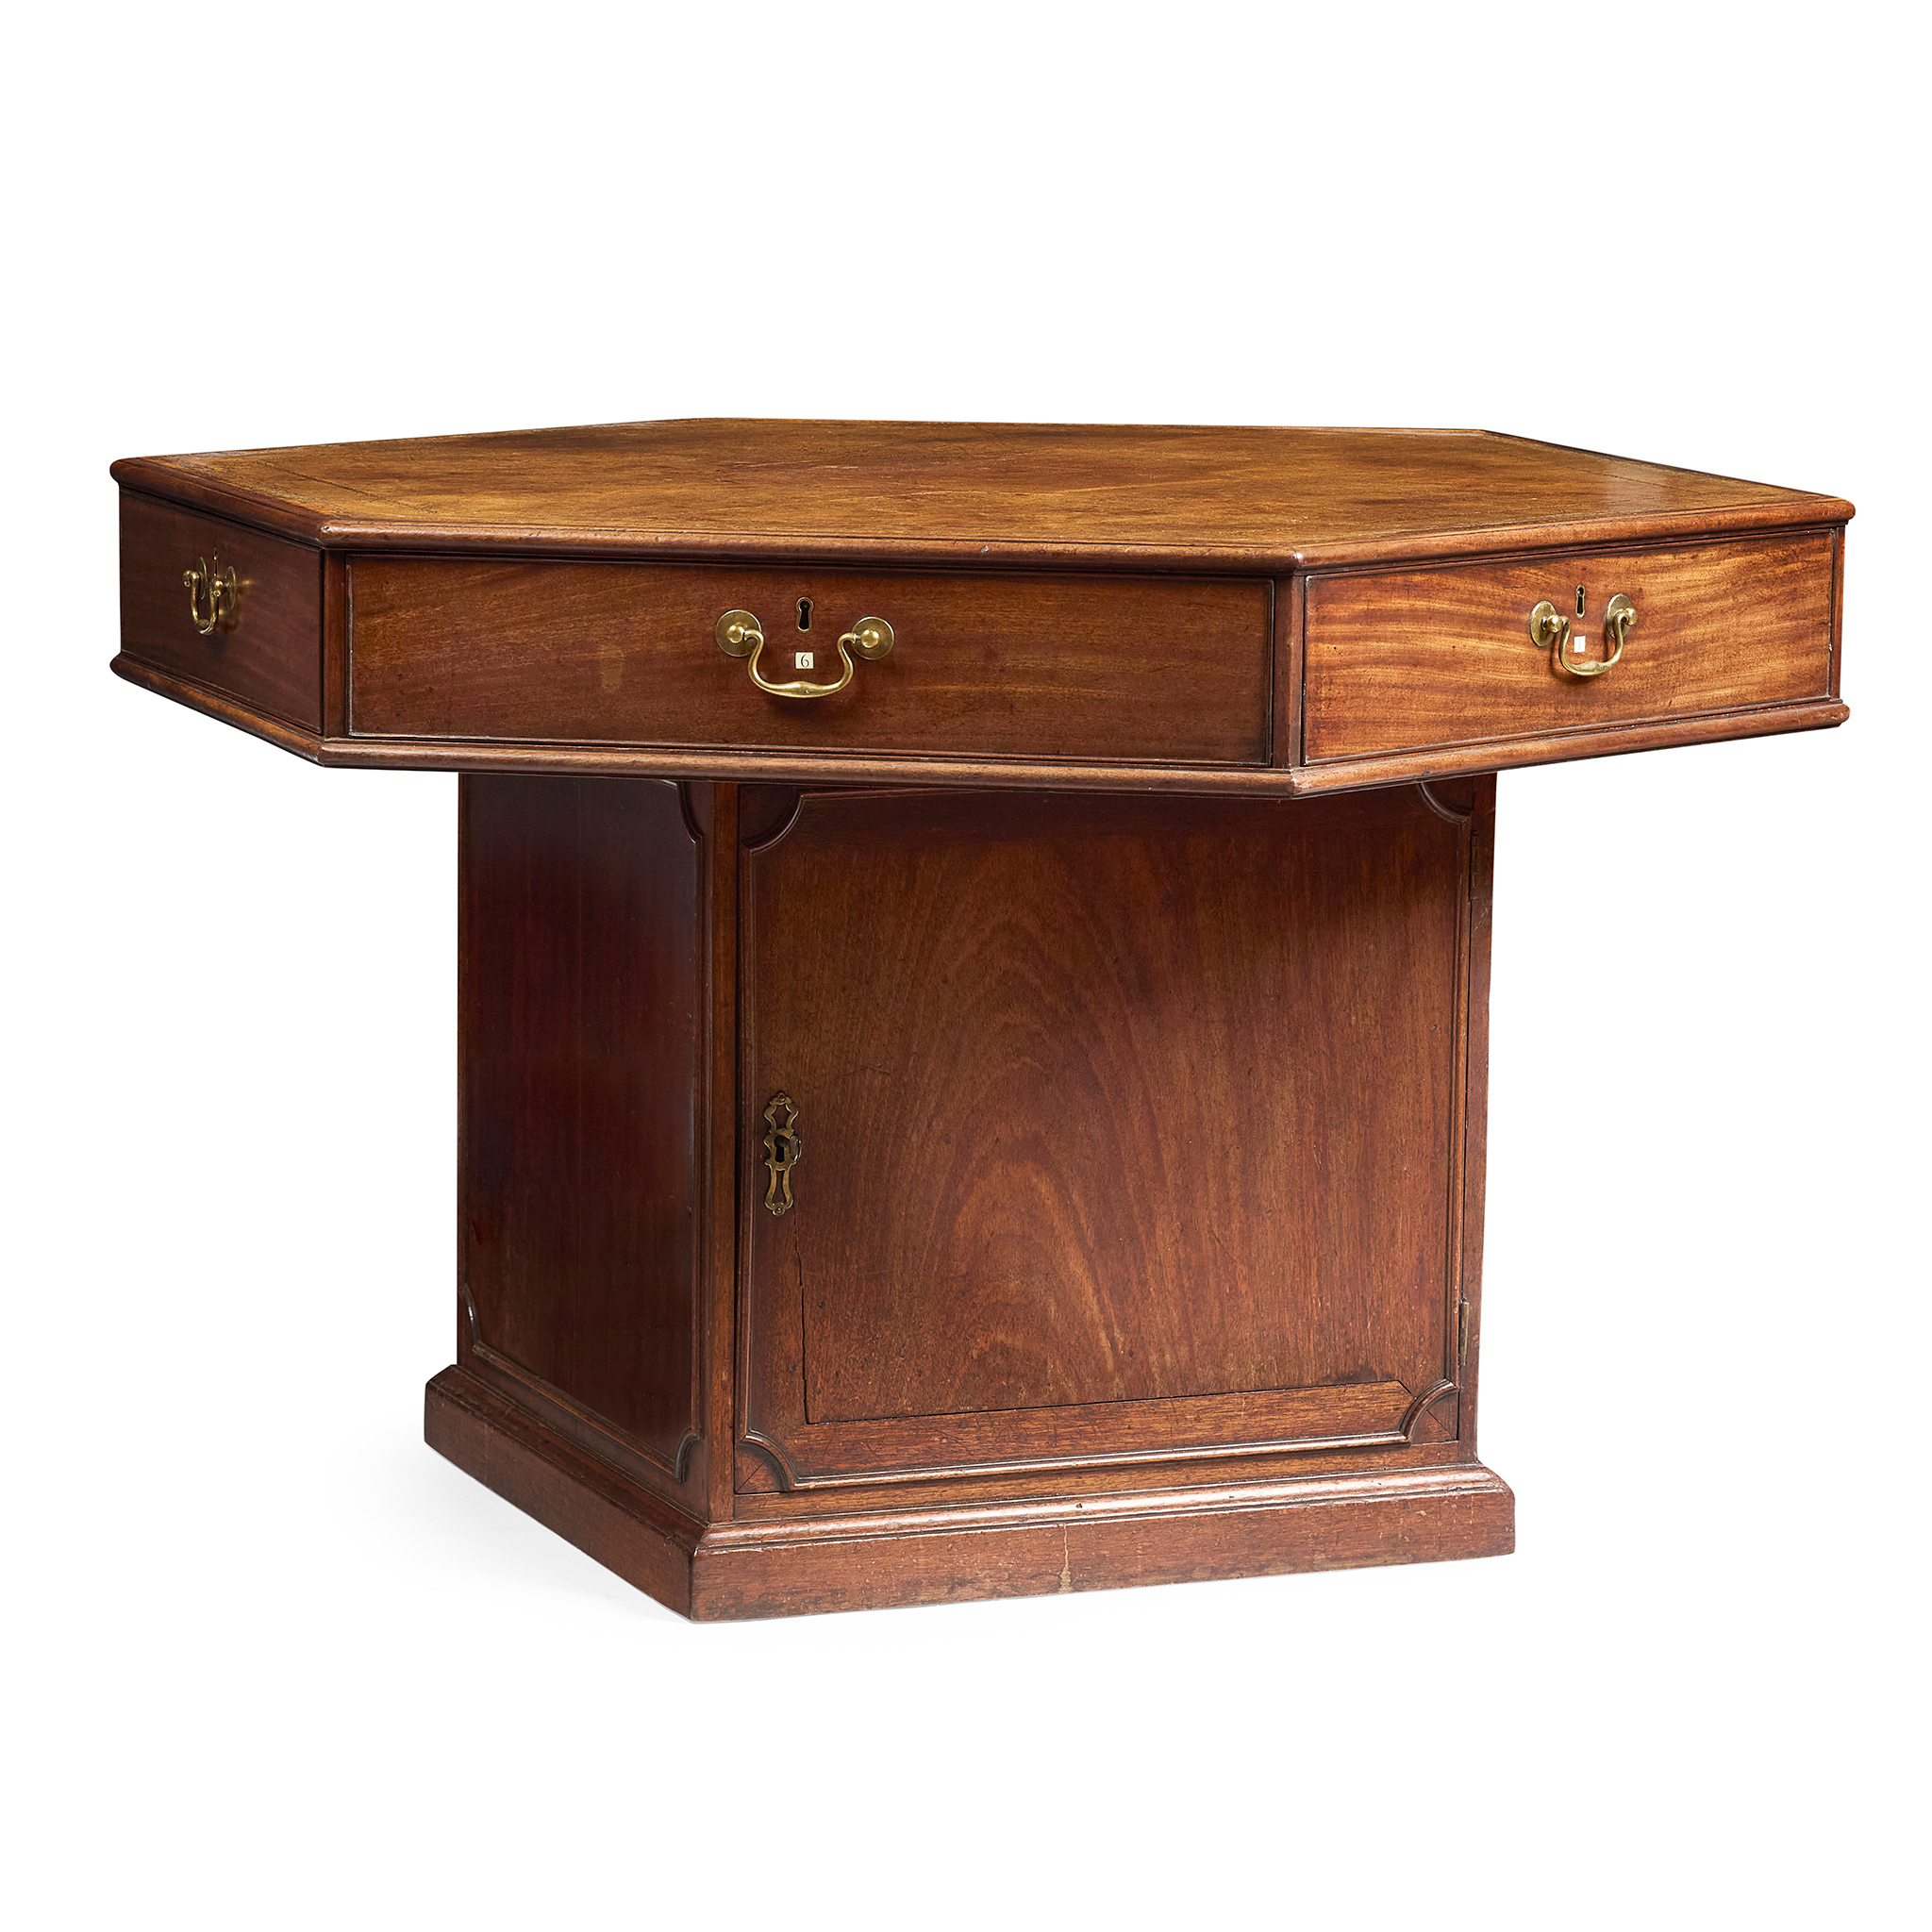 GEORGE III MAHOGANY HEXAGONAL RENT TABLE, IN THE MANNER OF GILLOWS OF LANCASTER - Image 2 of 2